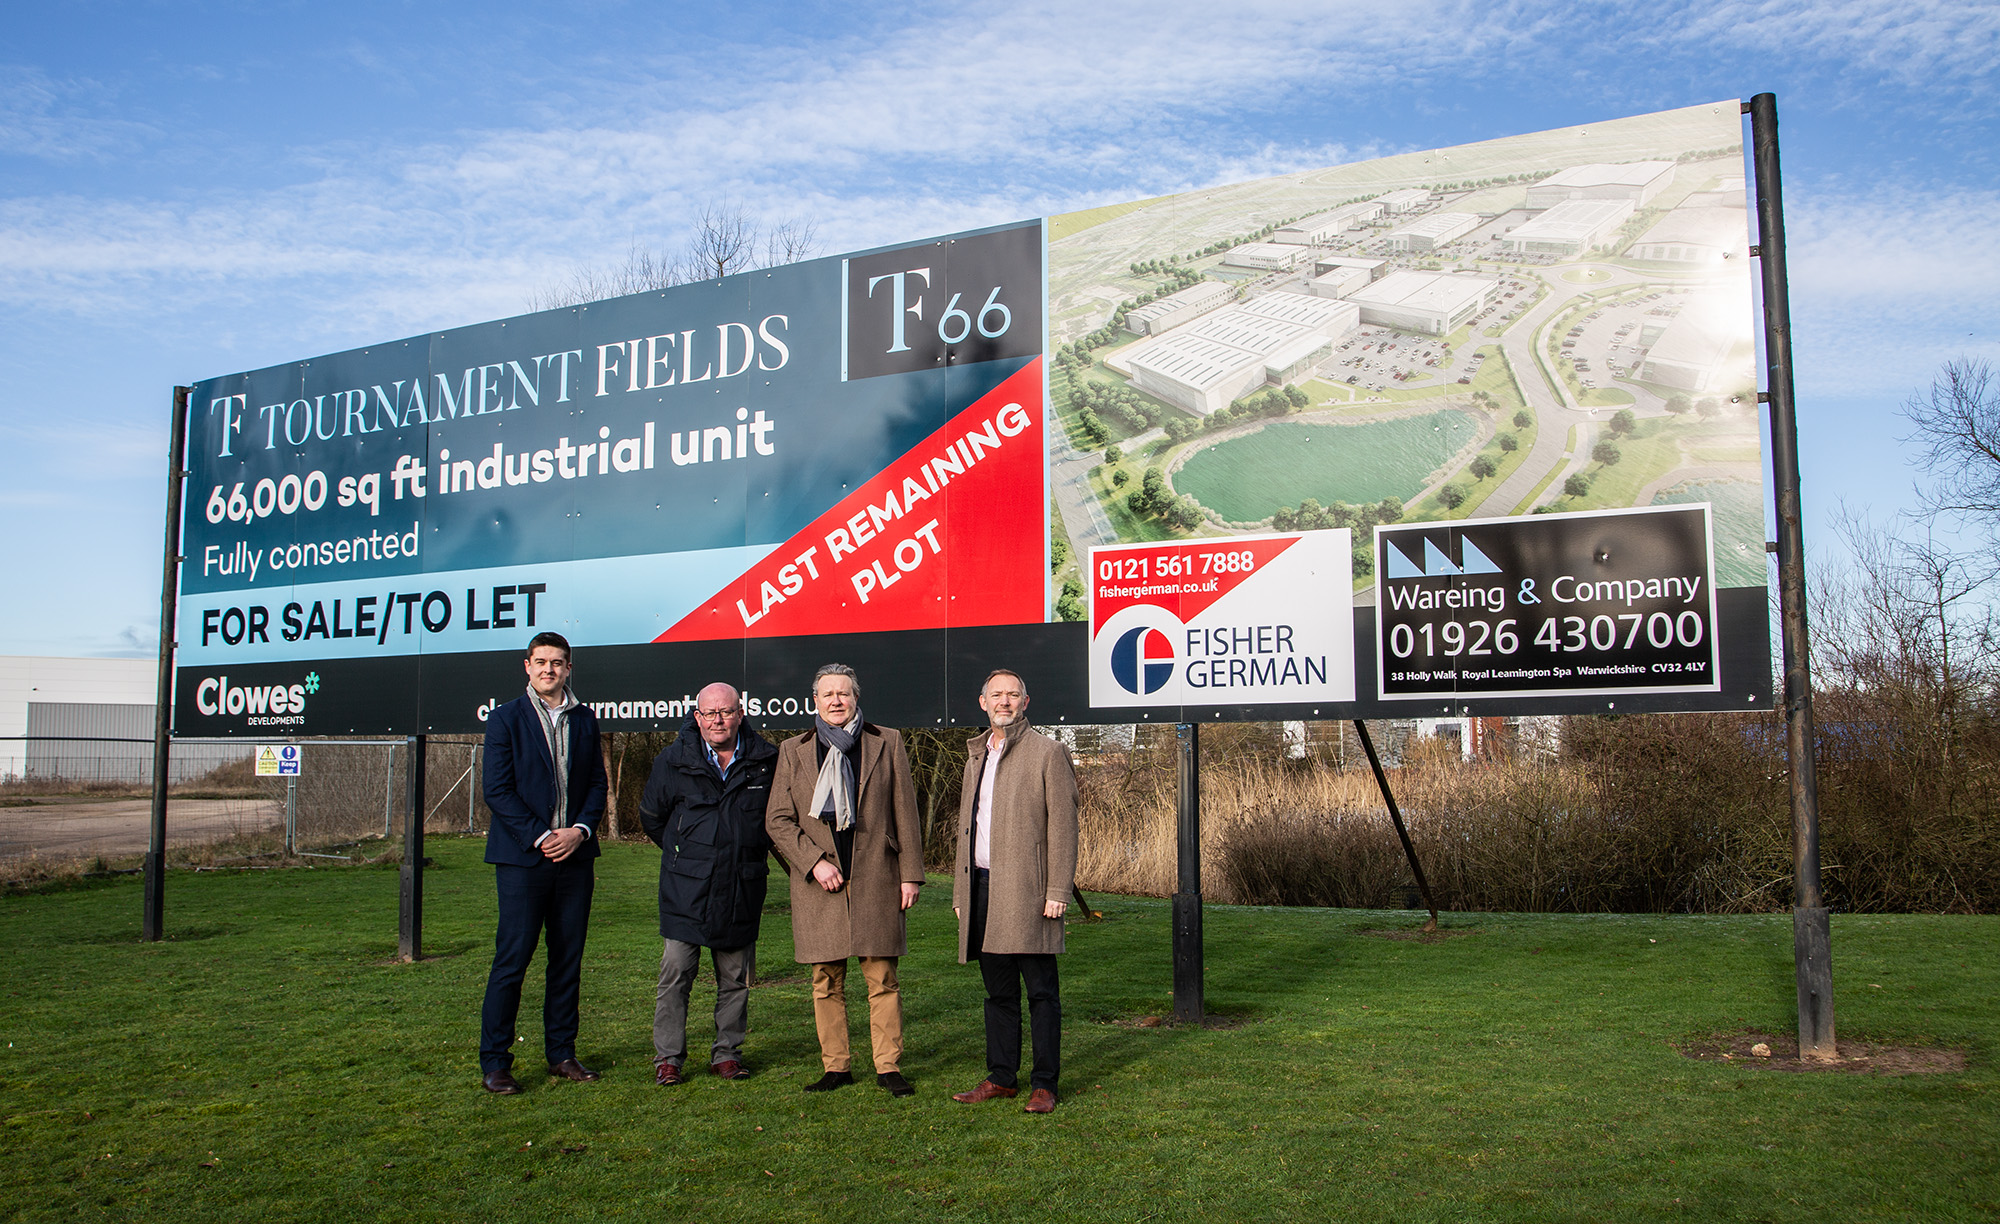 Tournament Fields, Plot TF66. Four men stood in front of a large advertising board, blue skies.